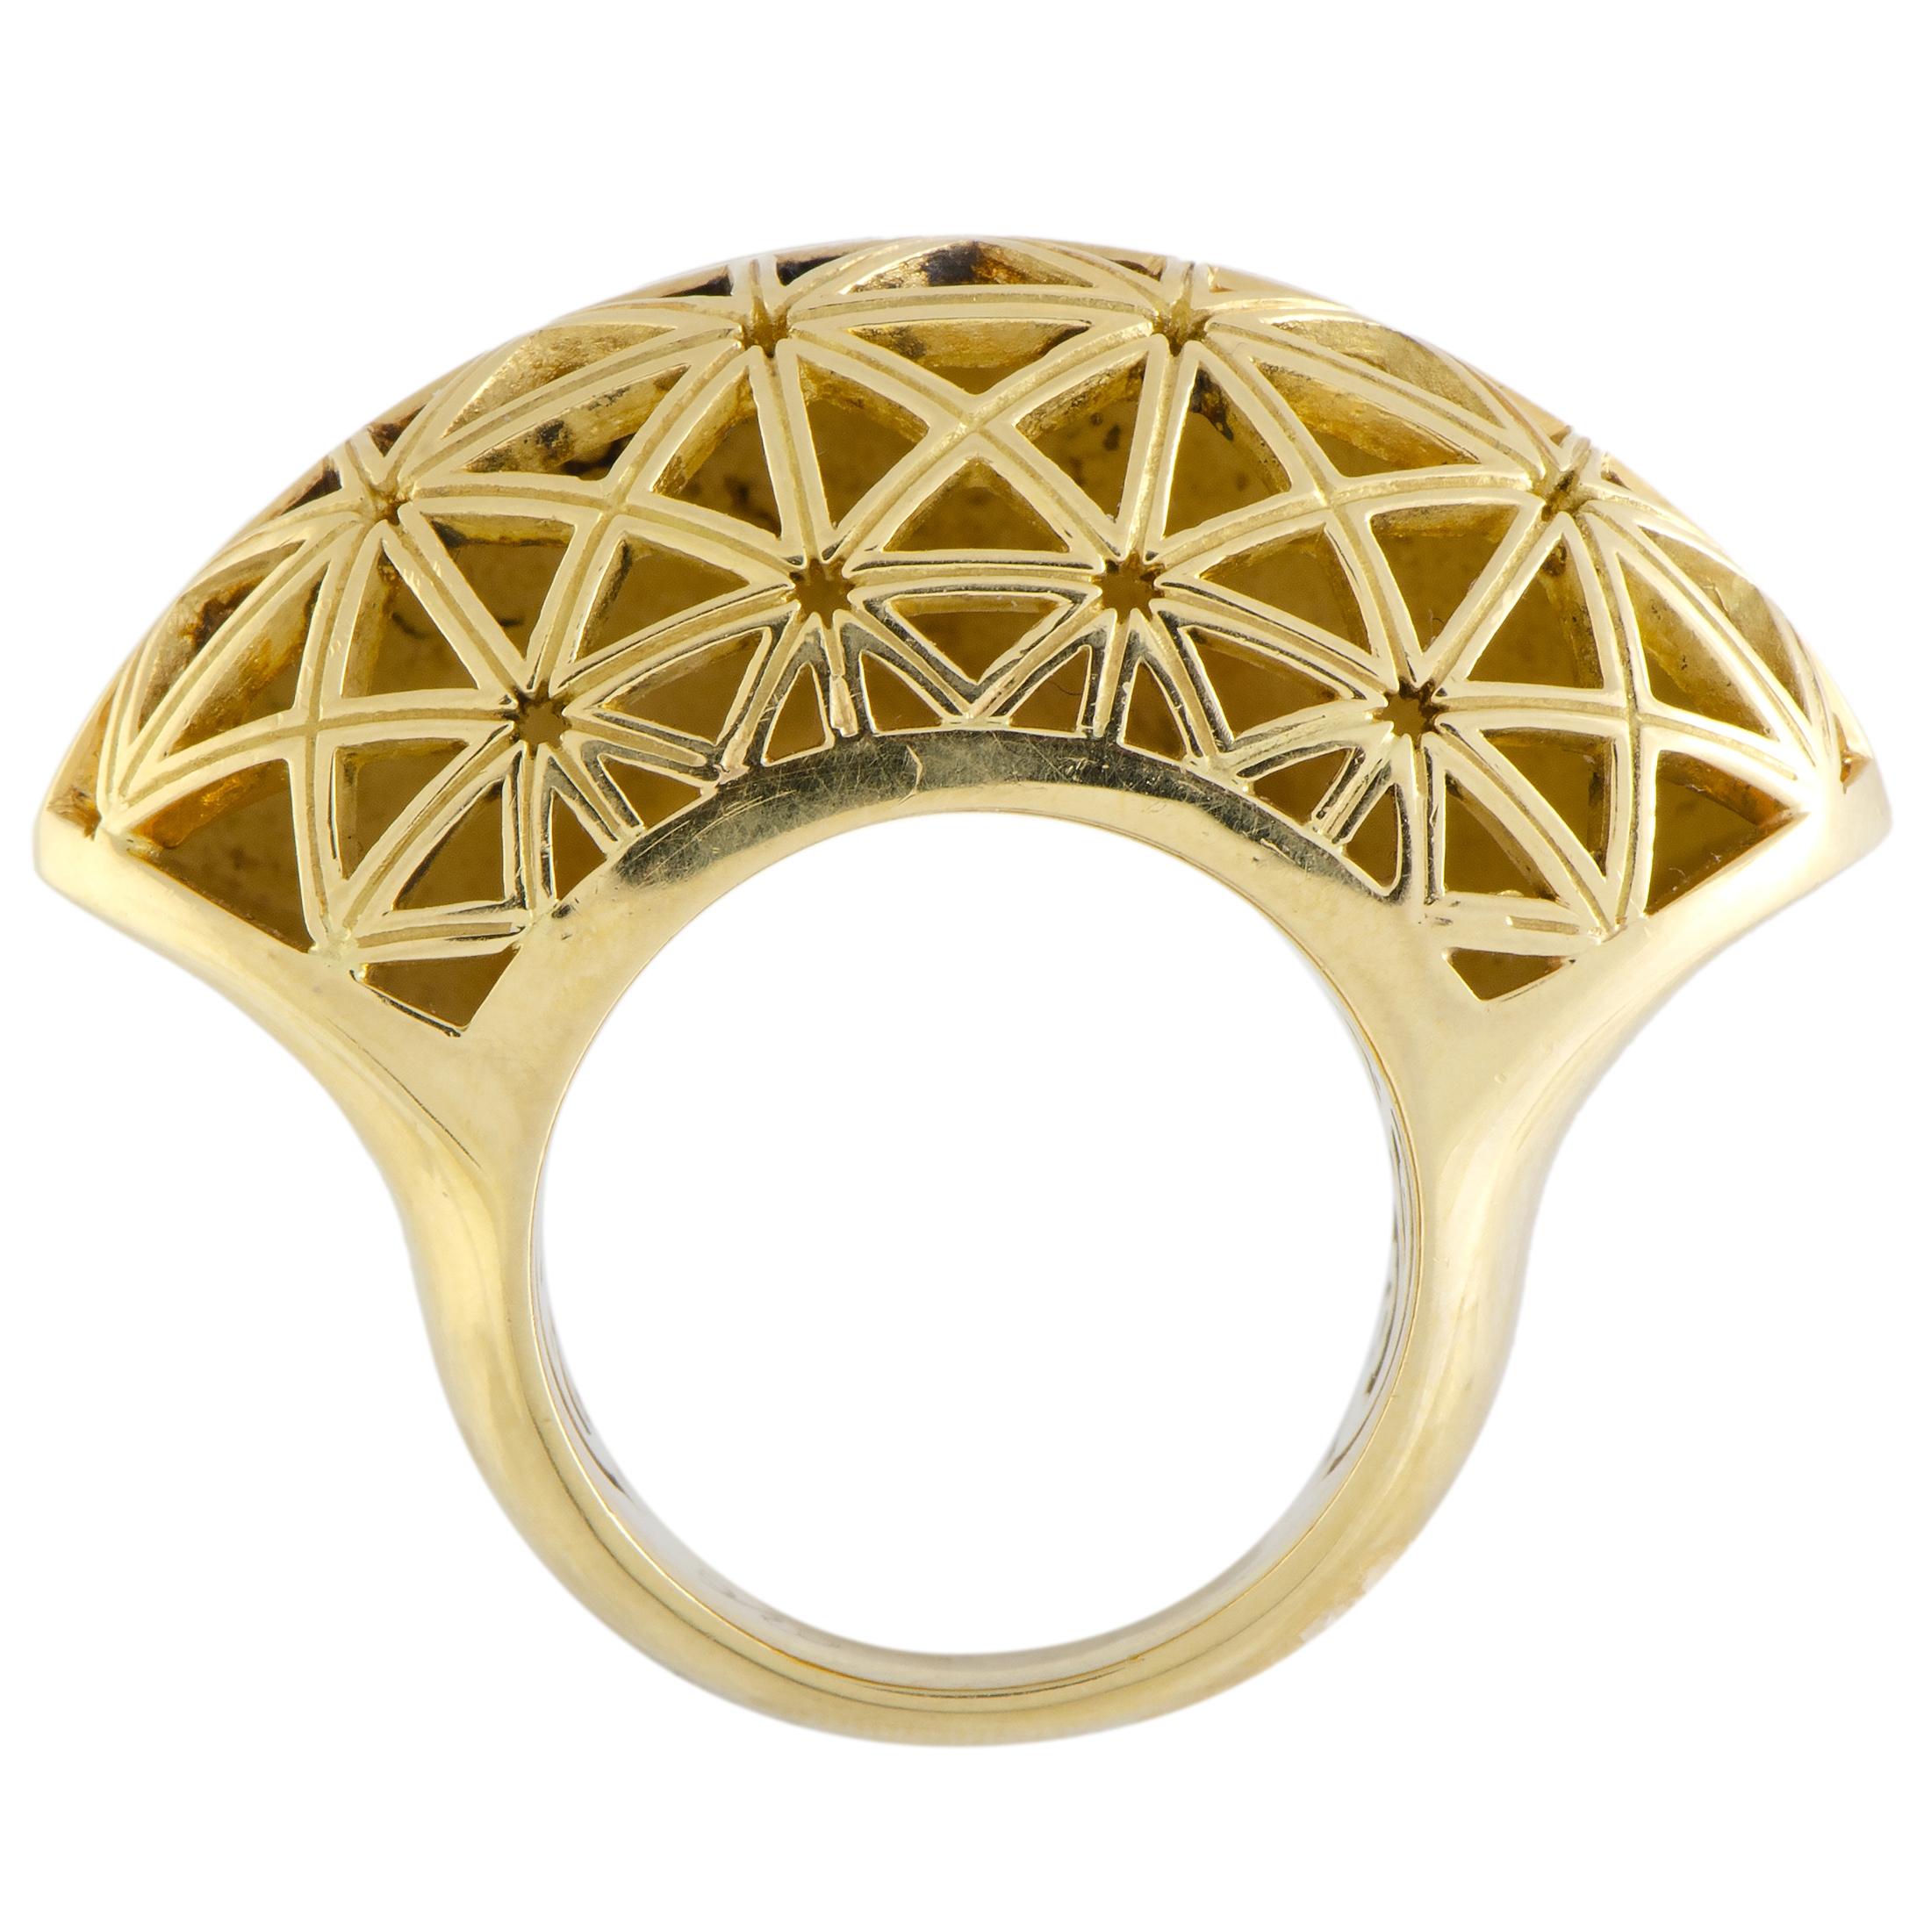 This majestic ring is artistically designed to embellish your finger by Carrera y Carrera. Extraordinarily crafted in beaming 18K yellow gold, the fabulous ring and its enthralling design is decorated with 1.00ct of dazzling diamonds that enhance